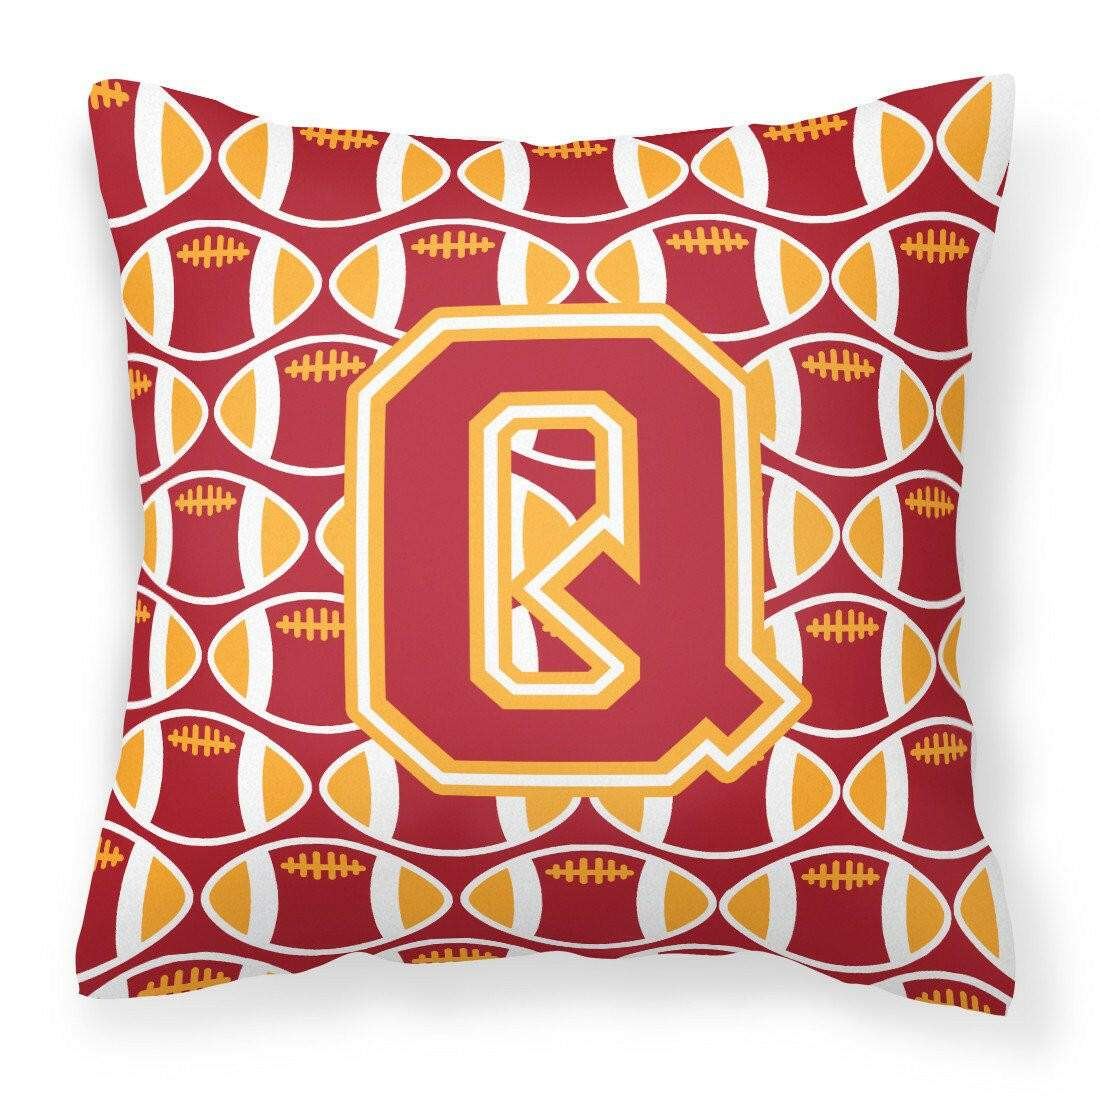 Letter Q Football Cardinal and Gold Fabric Decorative Pillow CJ1070-QPW1414 by Caroline's Treasures